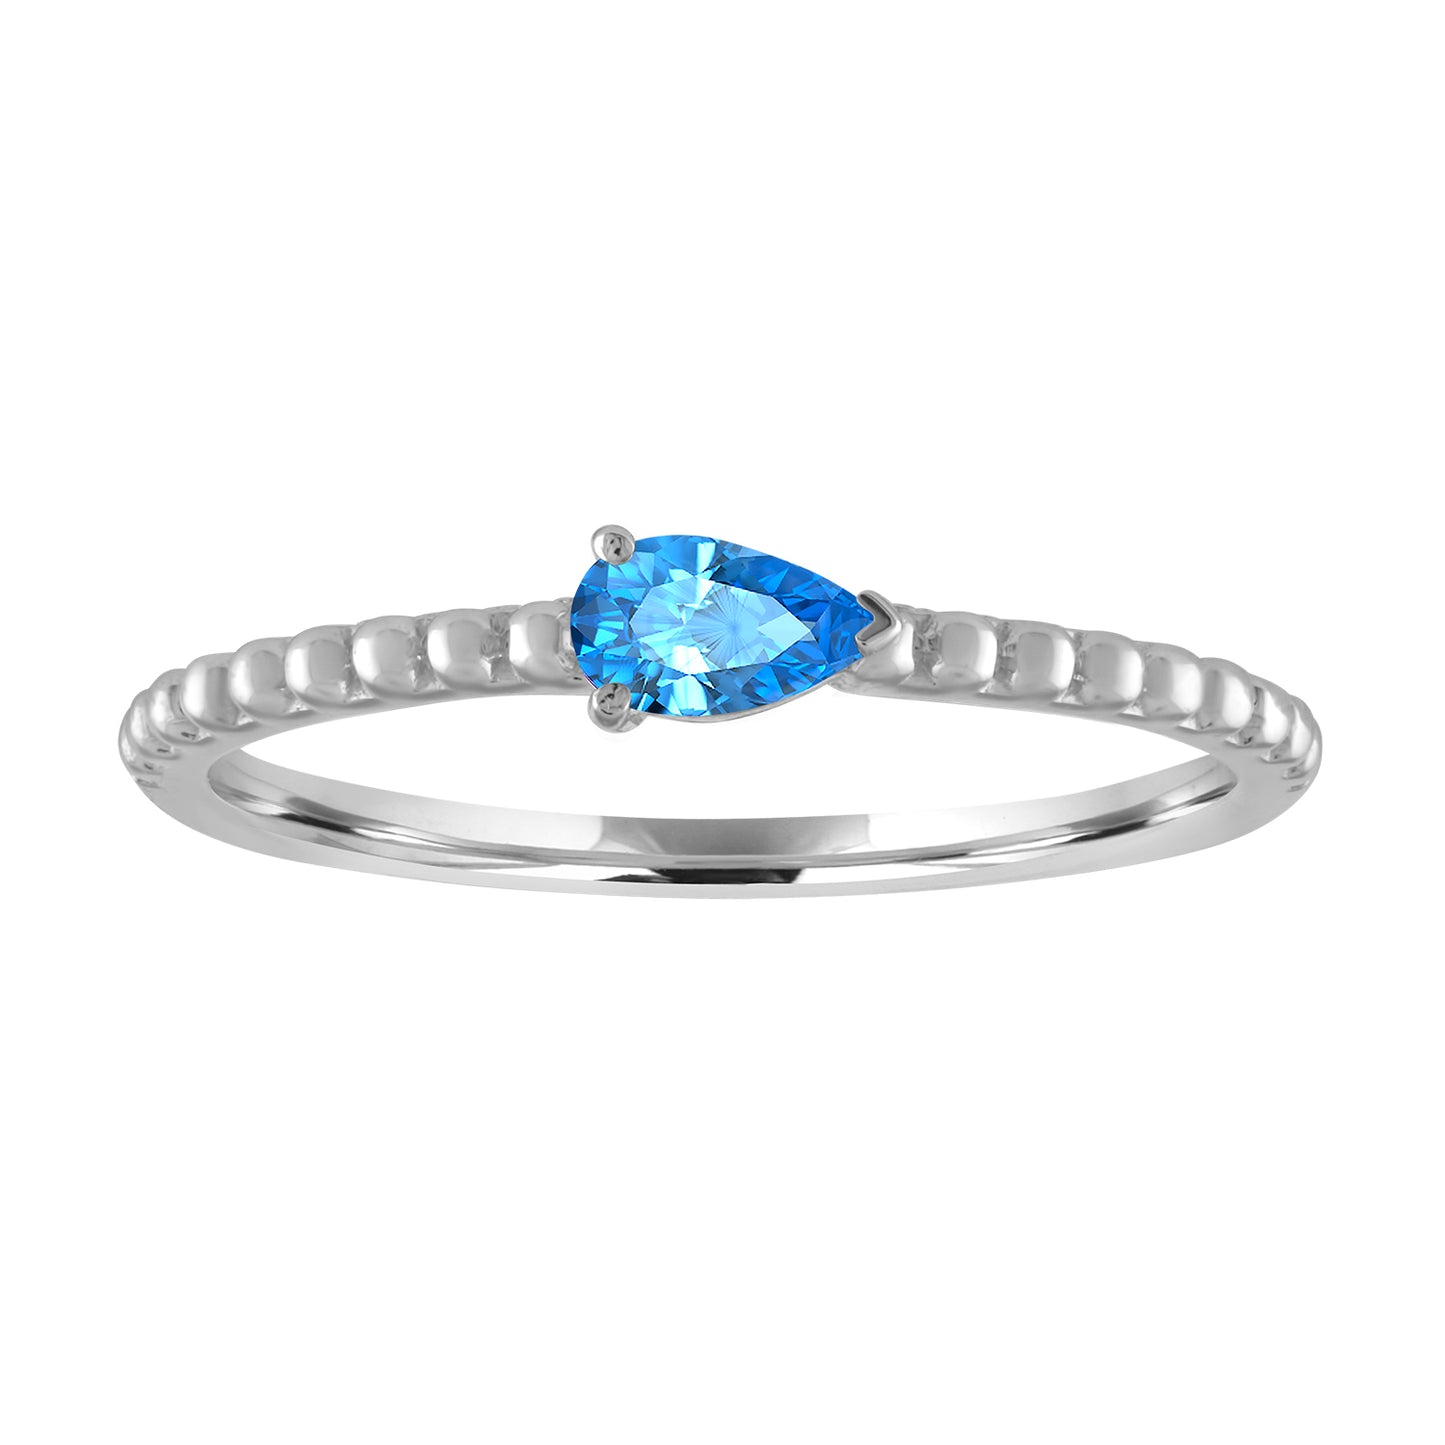 White gold beaded skinny band with a pear shaped blue topaz in the center. 